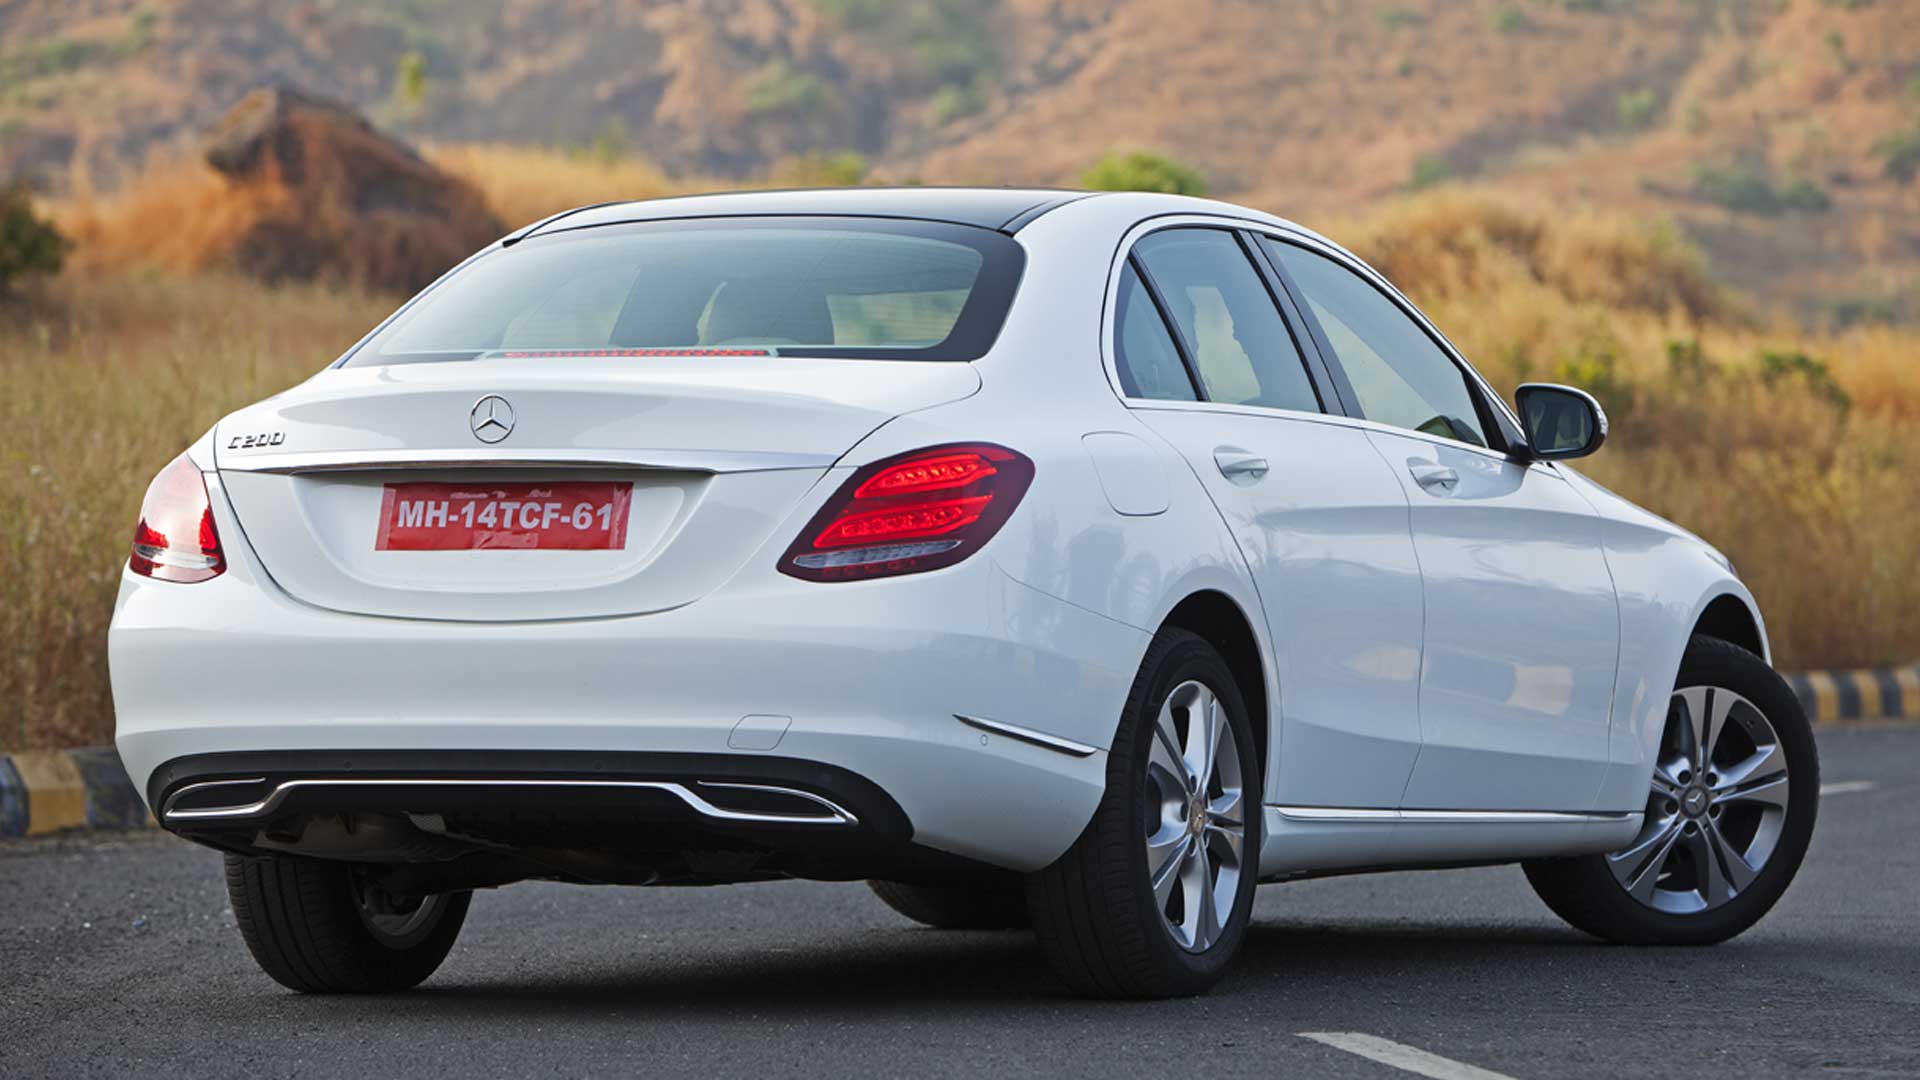 Mercedes Benz C Class 19 Price Mileage Reviews Specification Gallery Overdrive